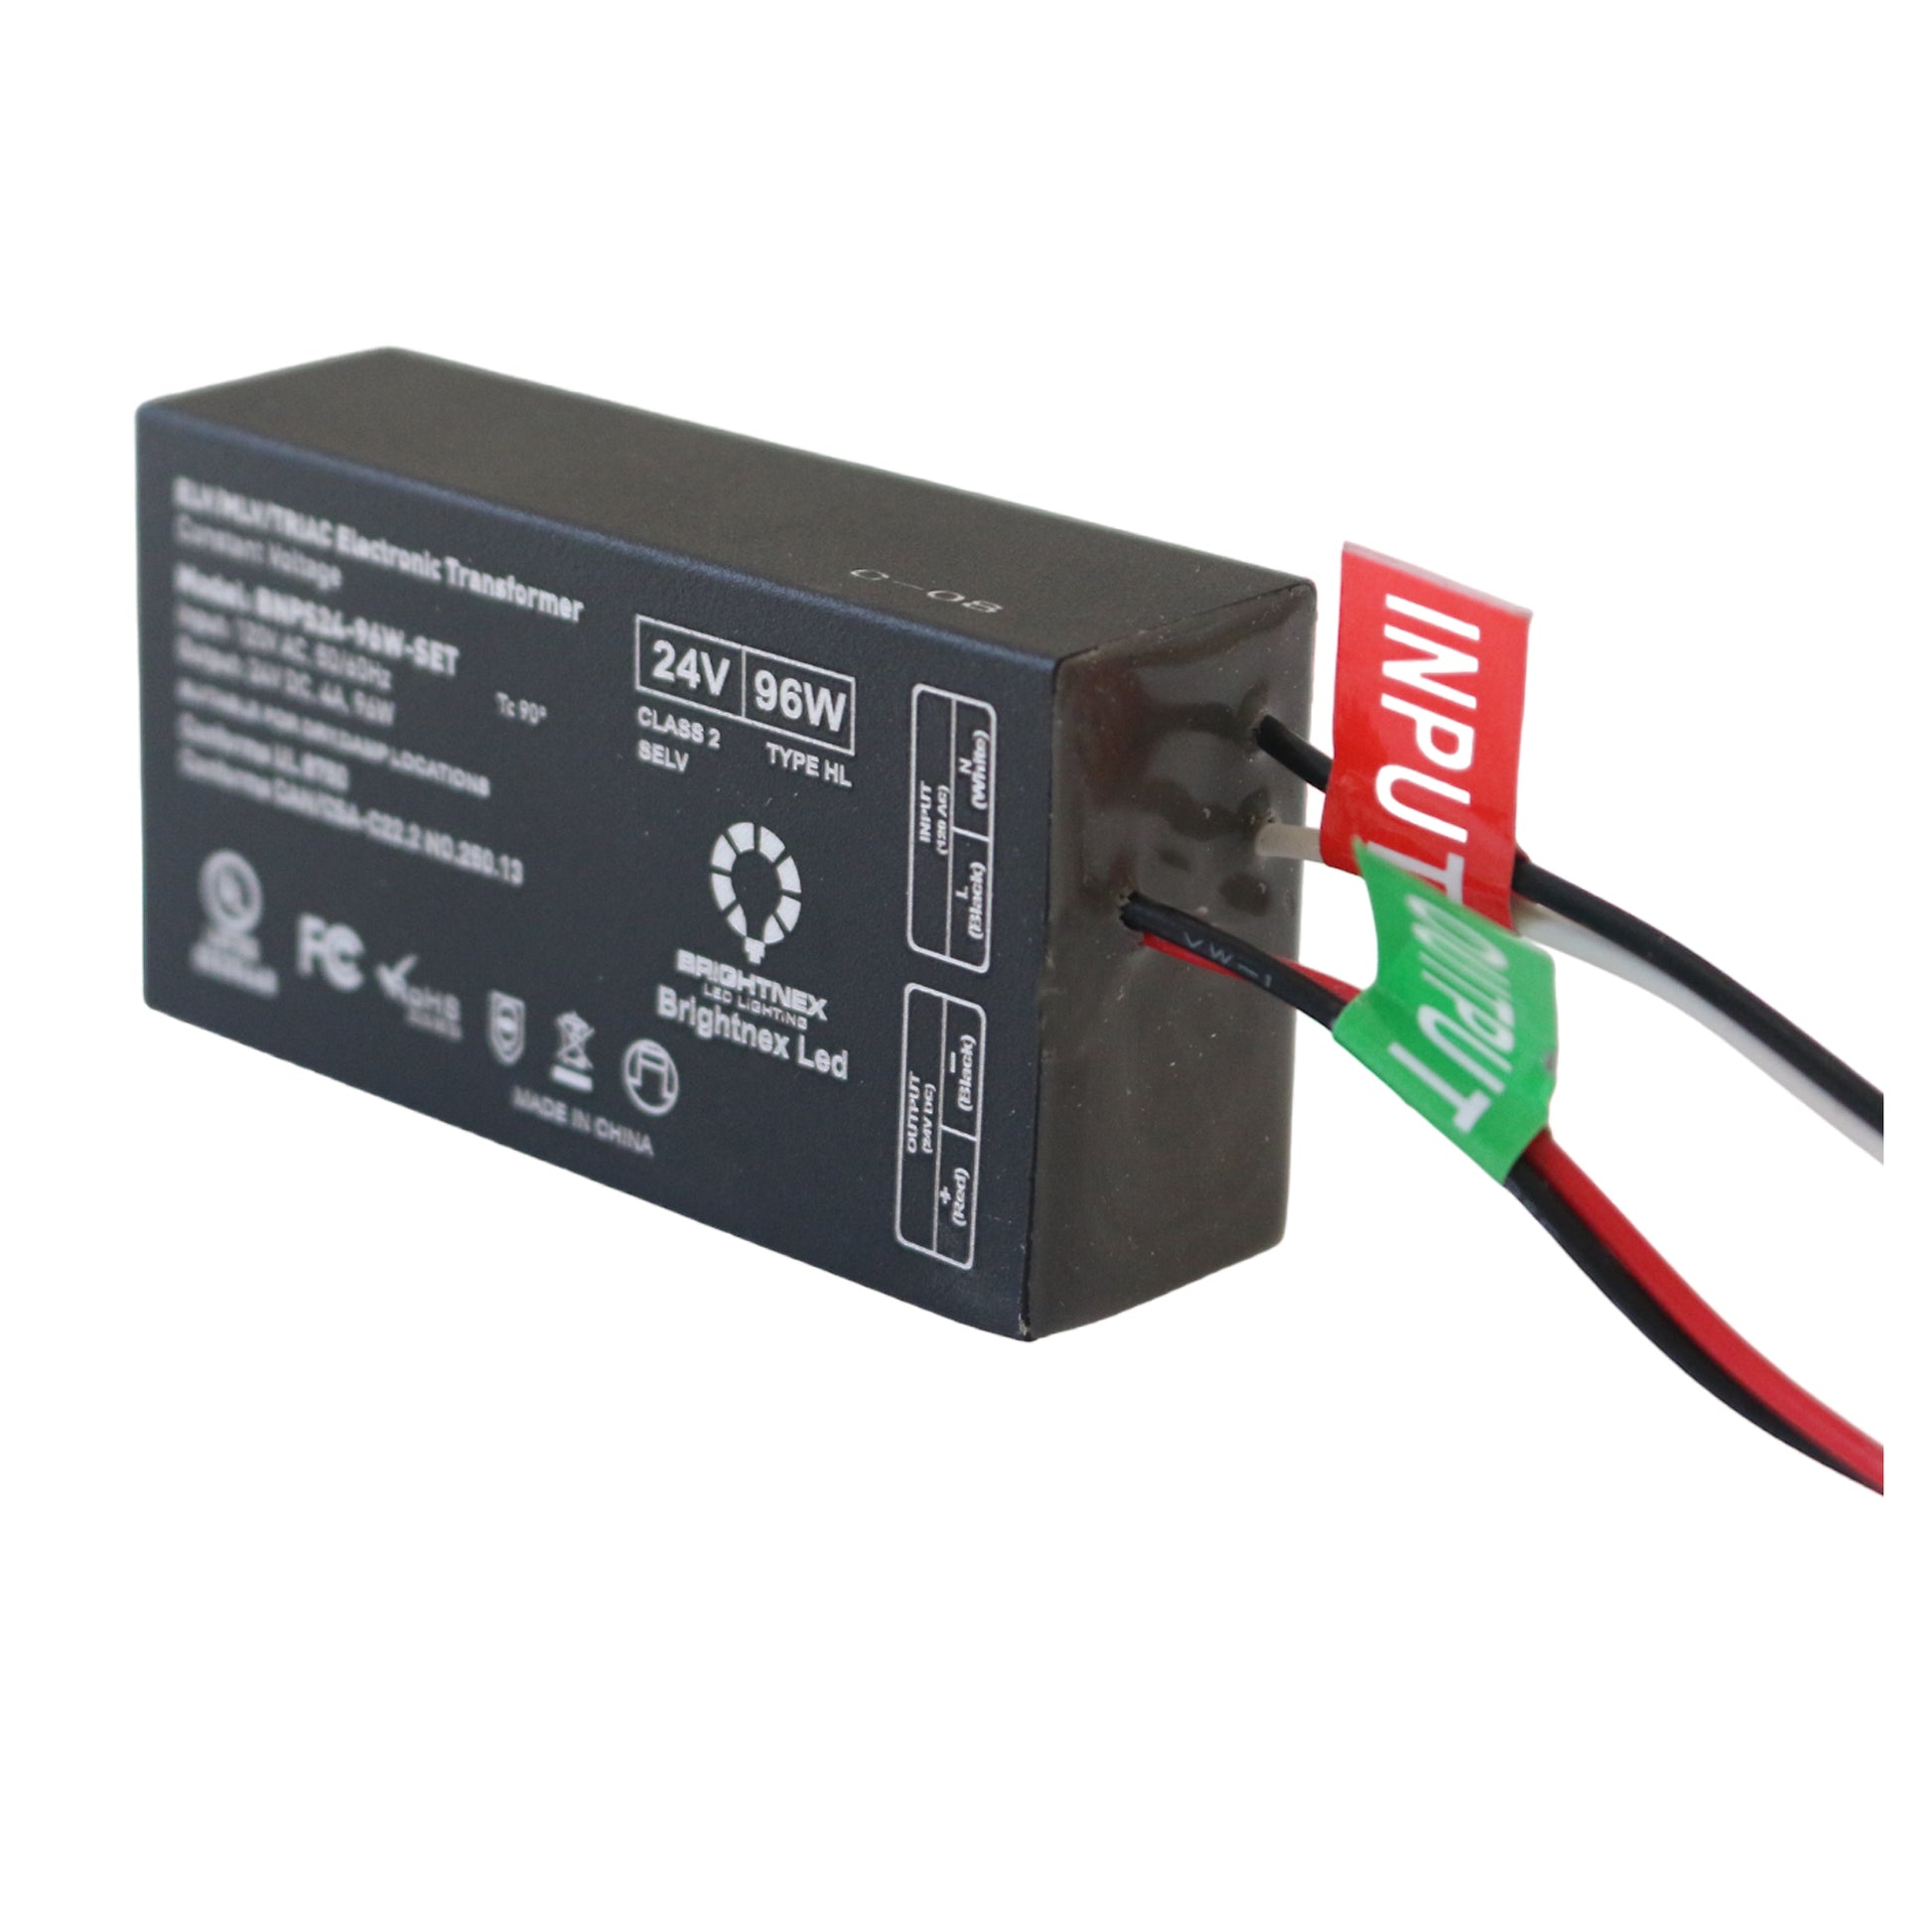 Smallest DIMMABLE TRANSFORMER (LED Driver), 24V, 96W